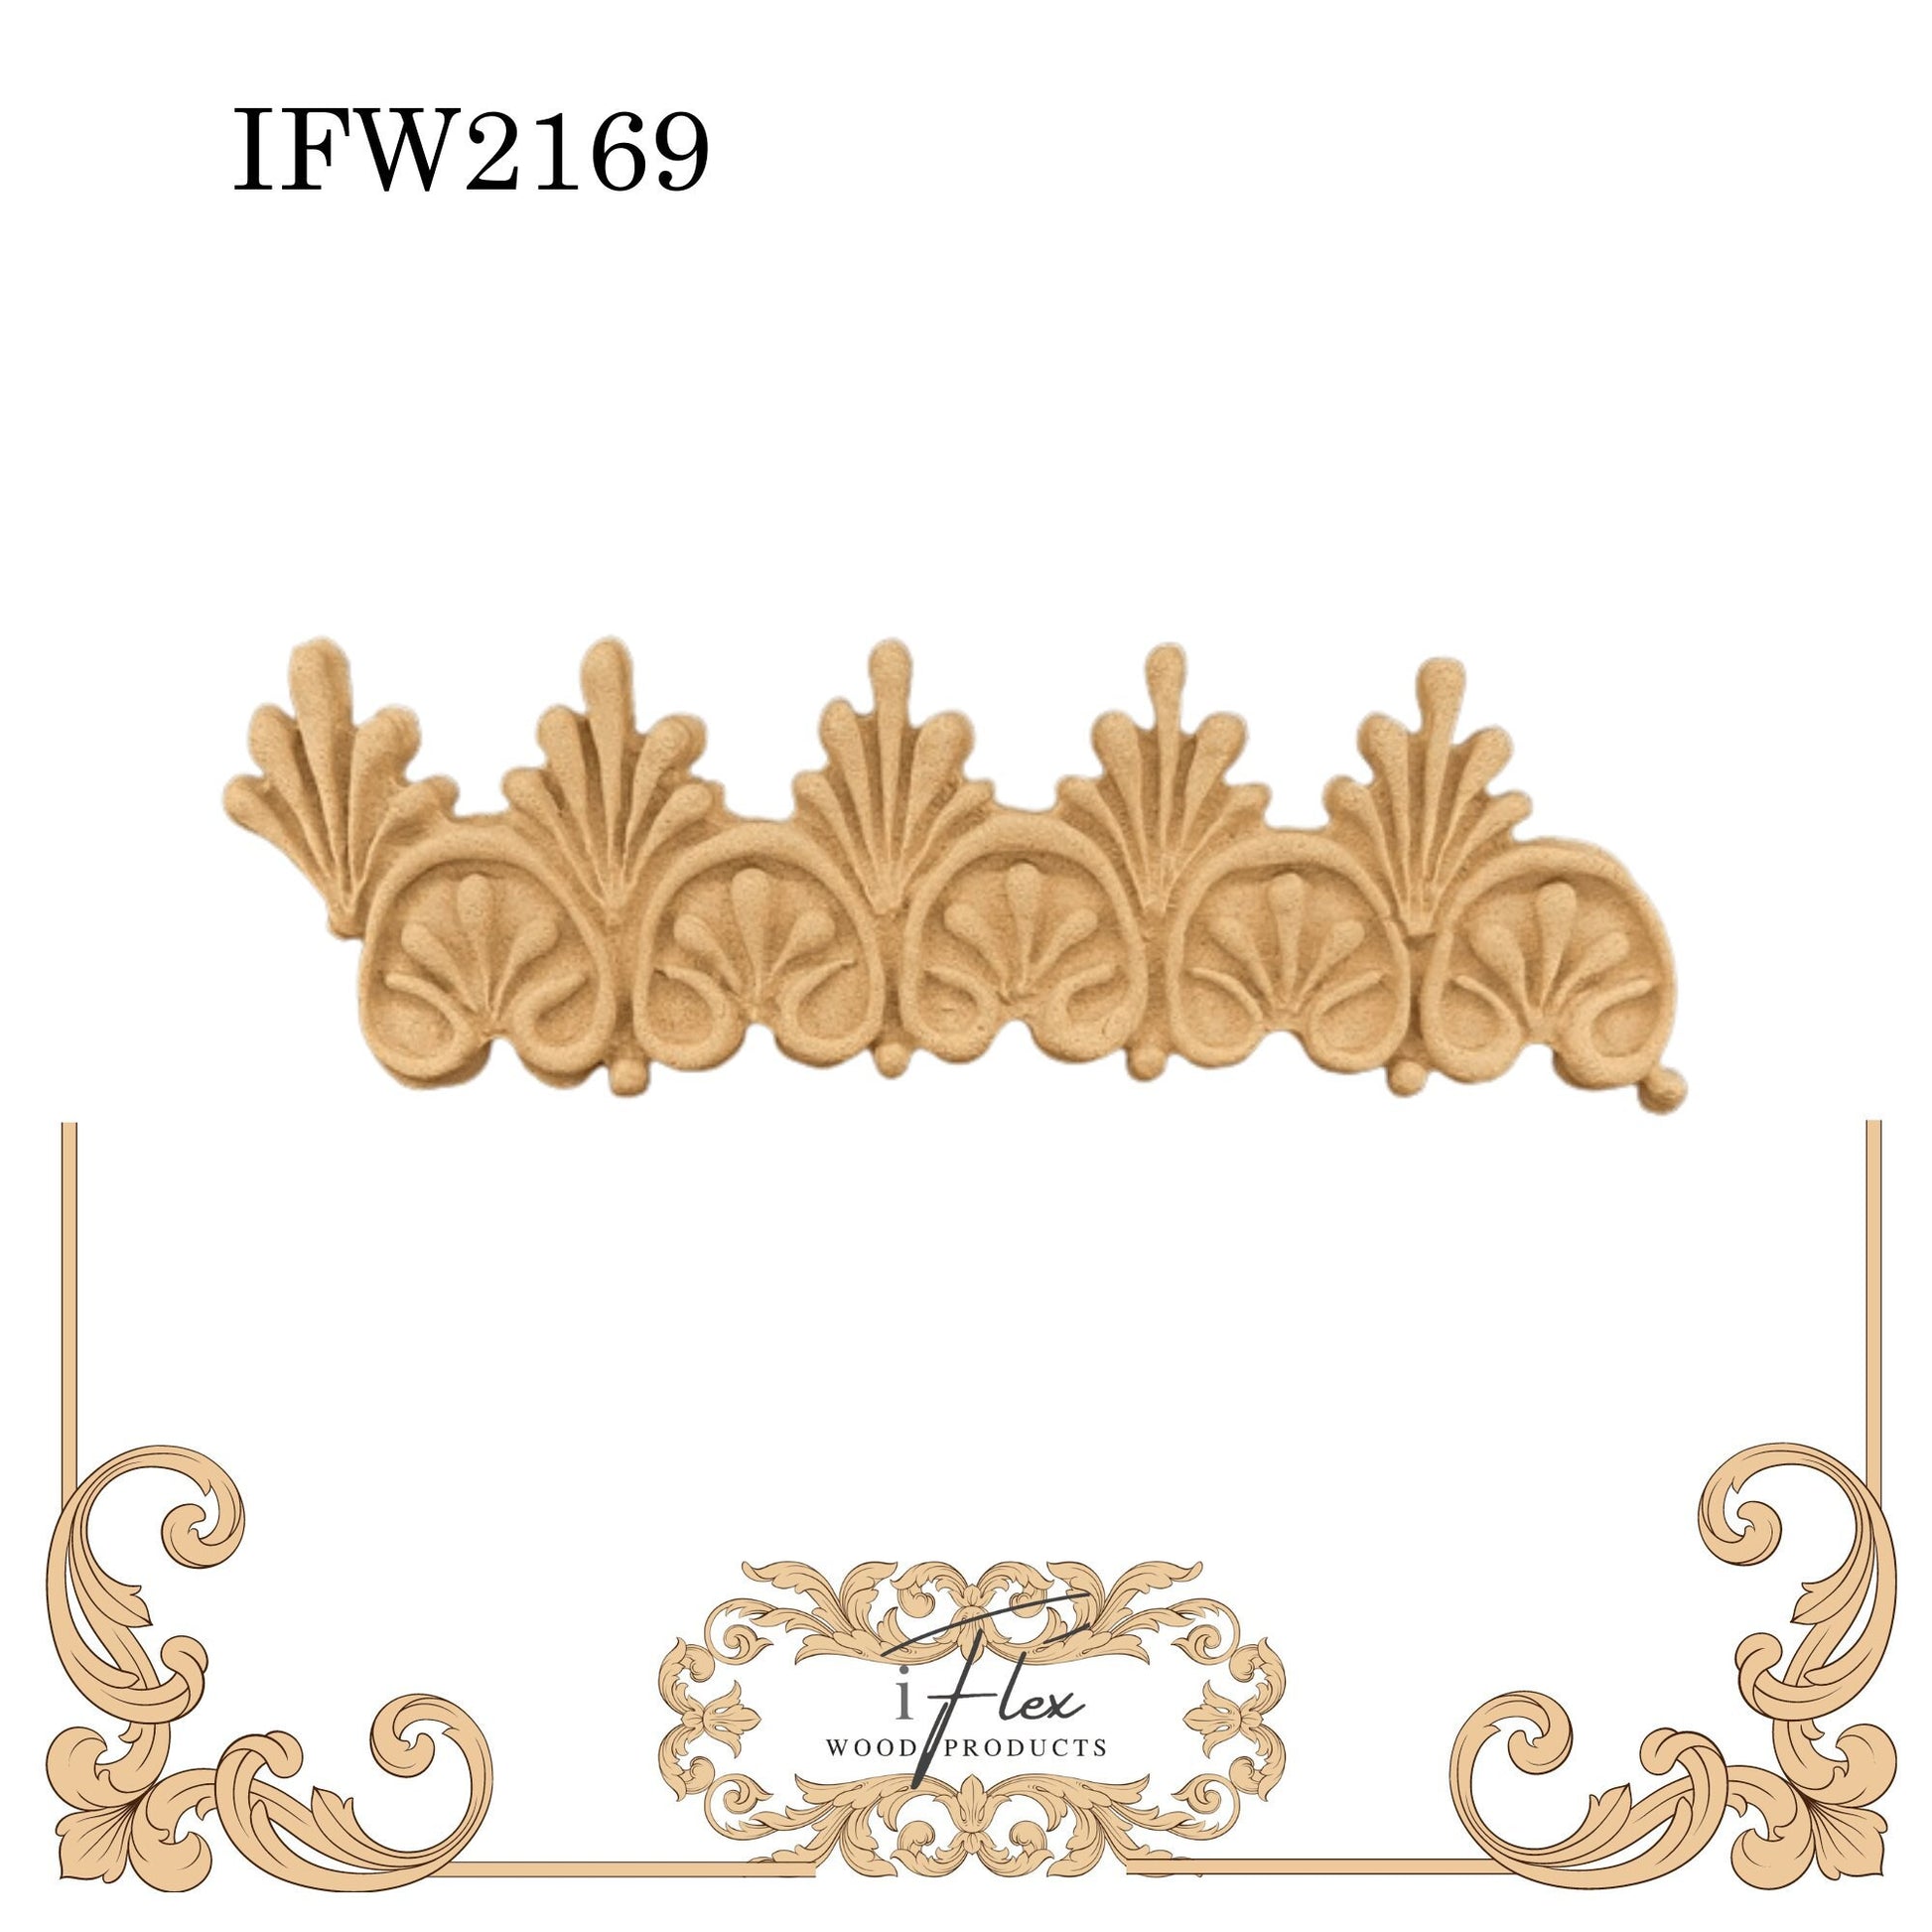 IFW 2169 iFlex Wood Products, bendable mouldings, flexible, wooden appliques, small trim